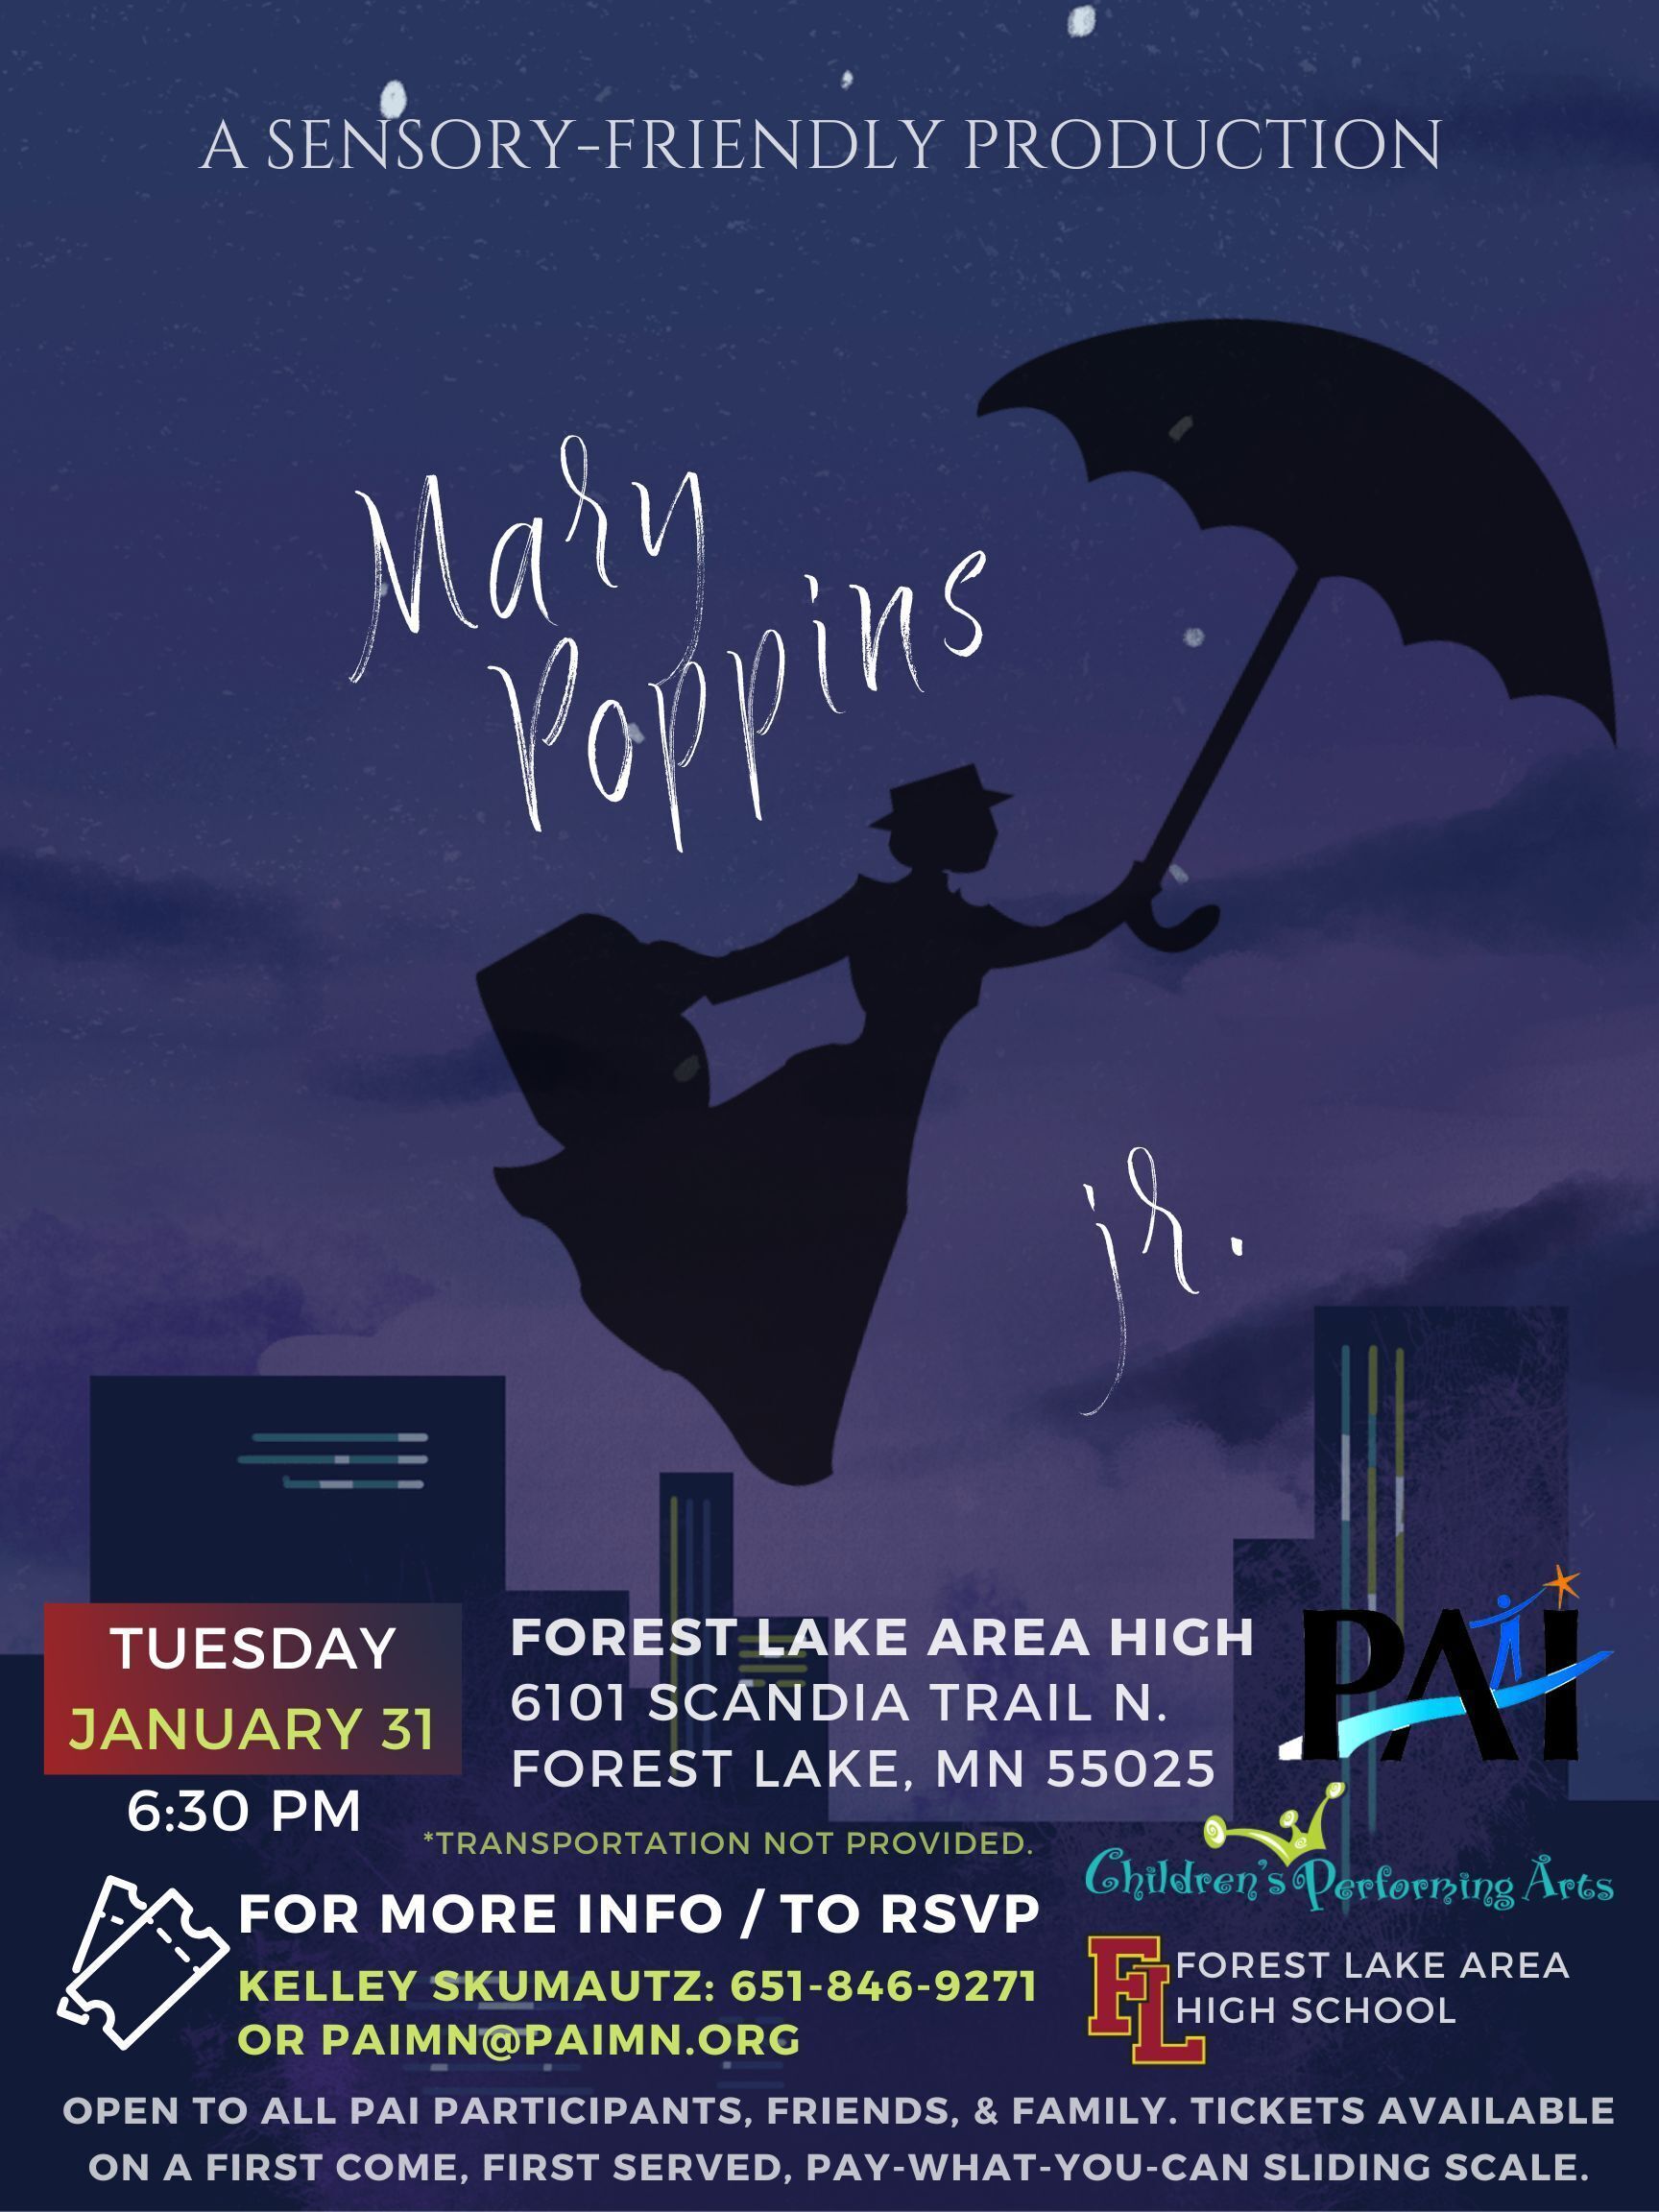 Flyer and event information for play performance of Mary Poppins Jr.